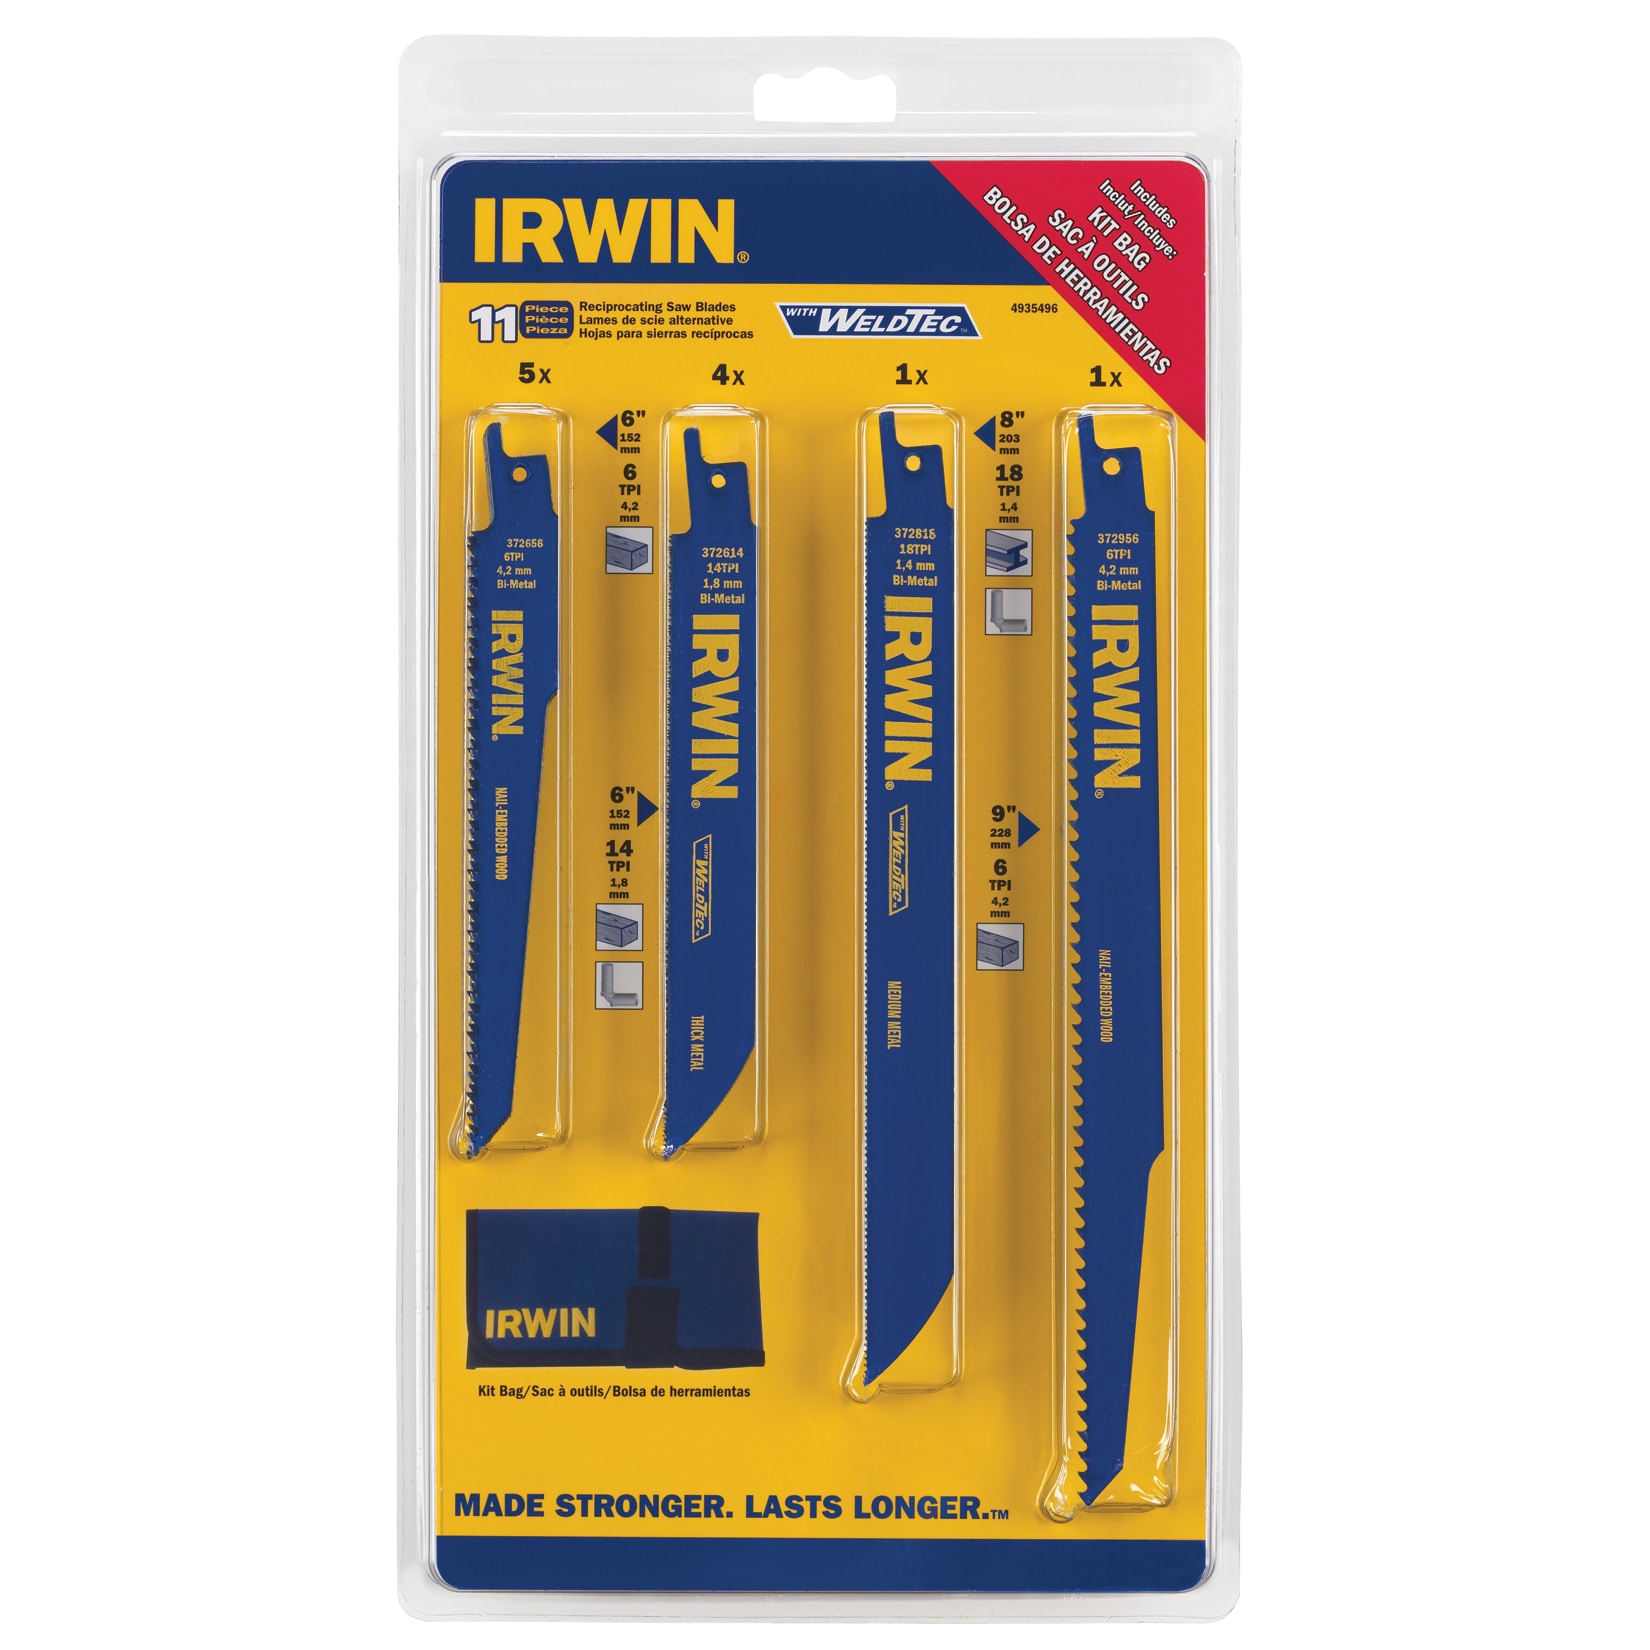 Coping Saw Blades, 10TPI, 6.5-In., 4-Pk.